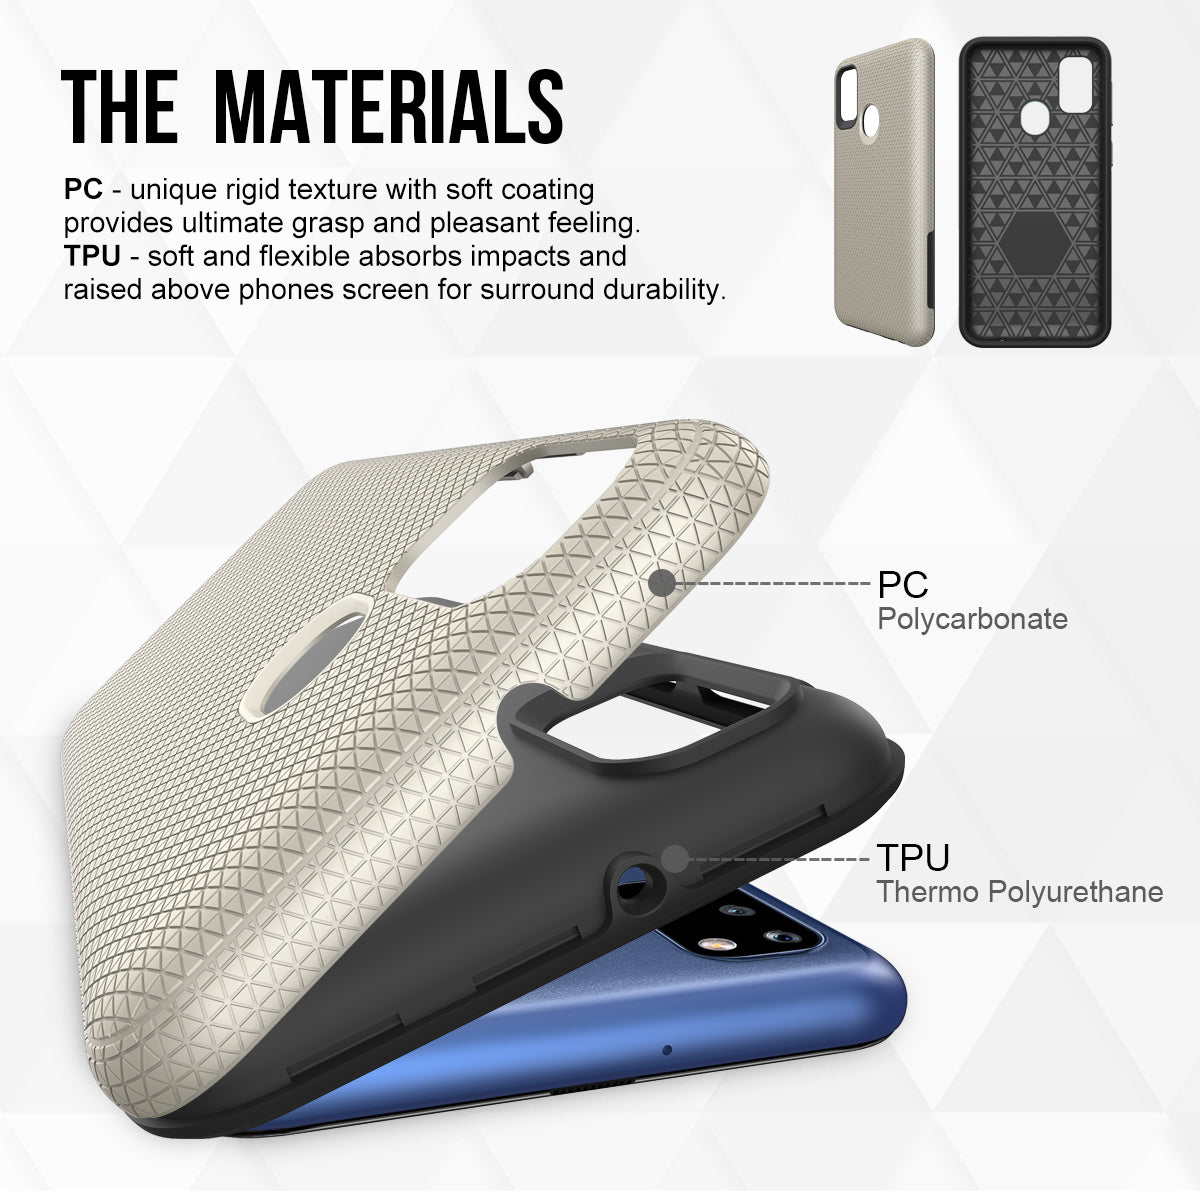 ZEOS Sphinx Dual Layer Case for Samsung Galaxy M30s